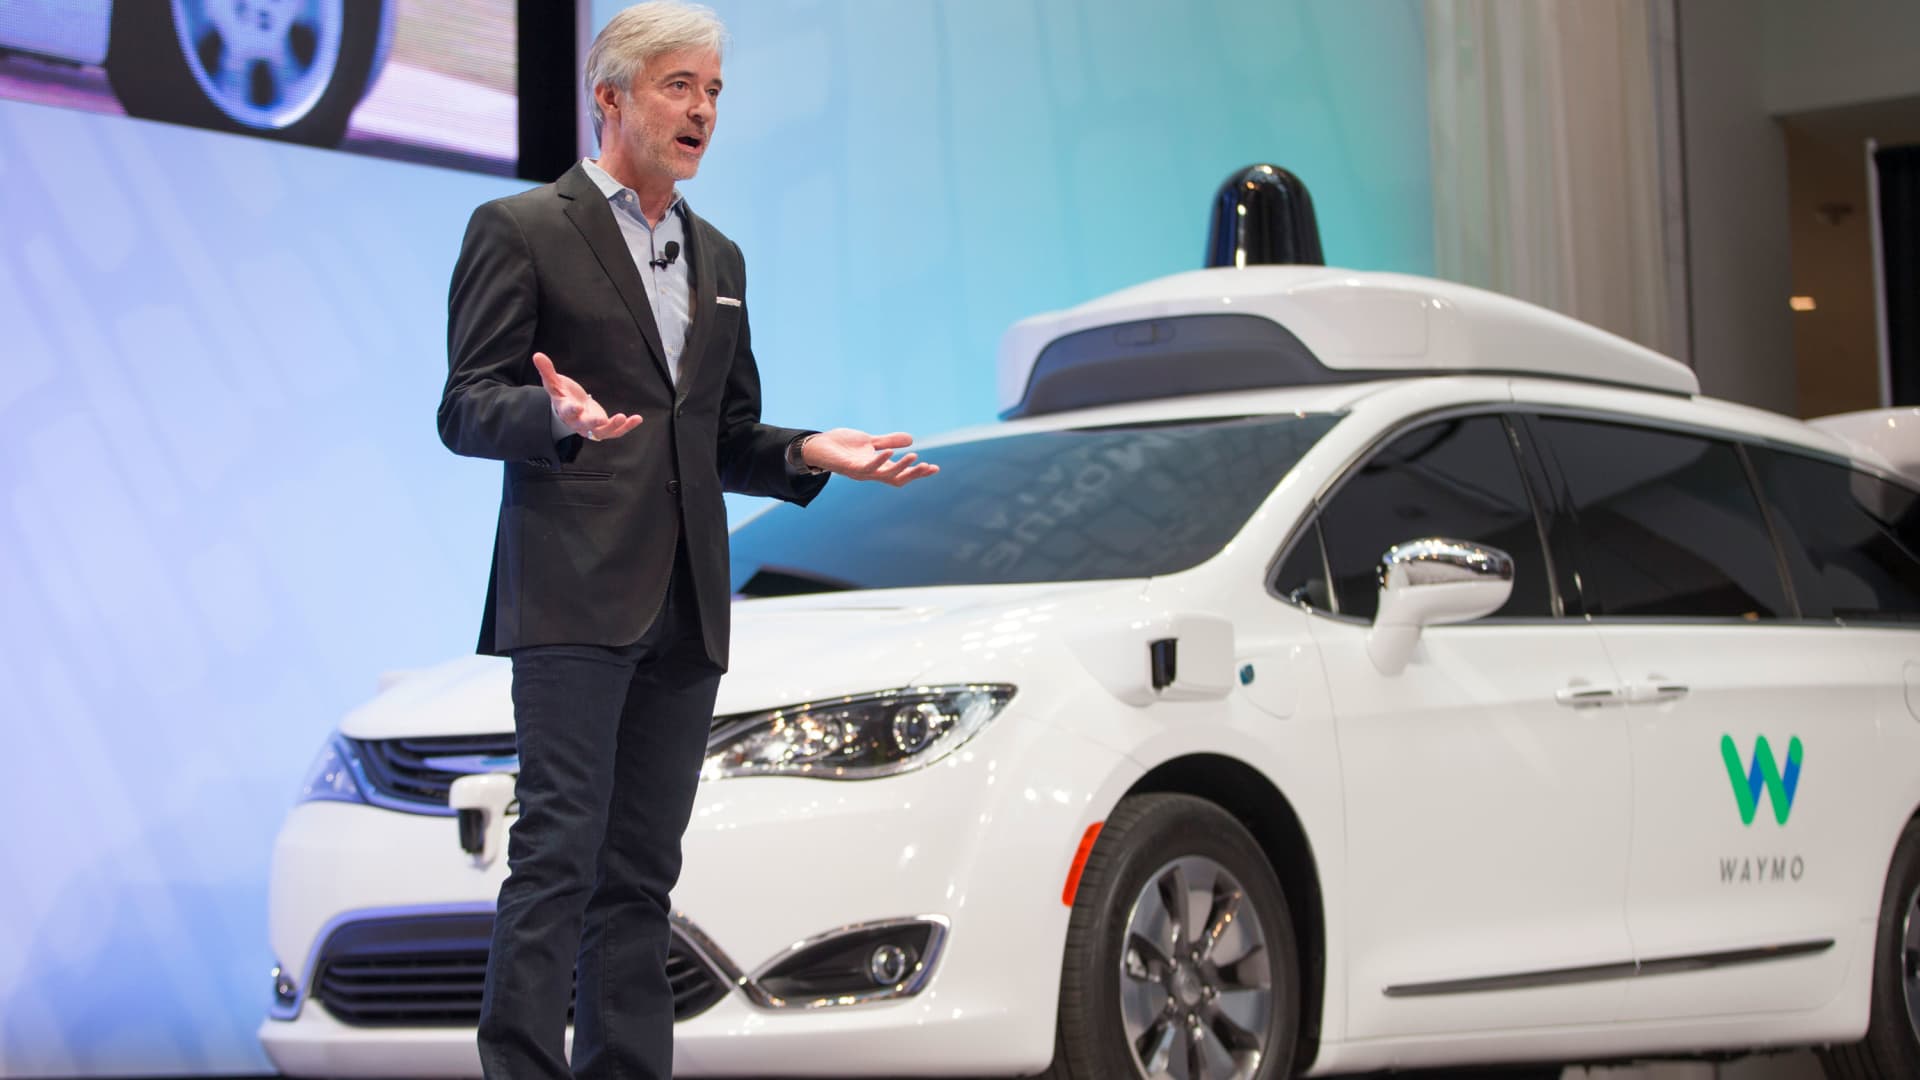 Alphabet's investment in Uber has multiplied by 20-fold since 2013